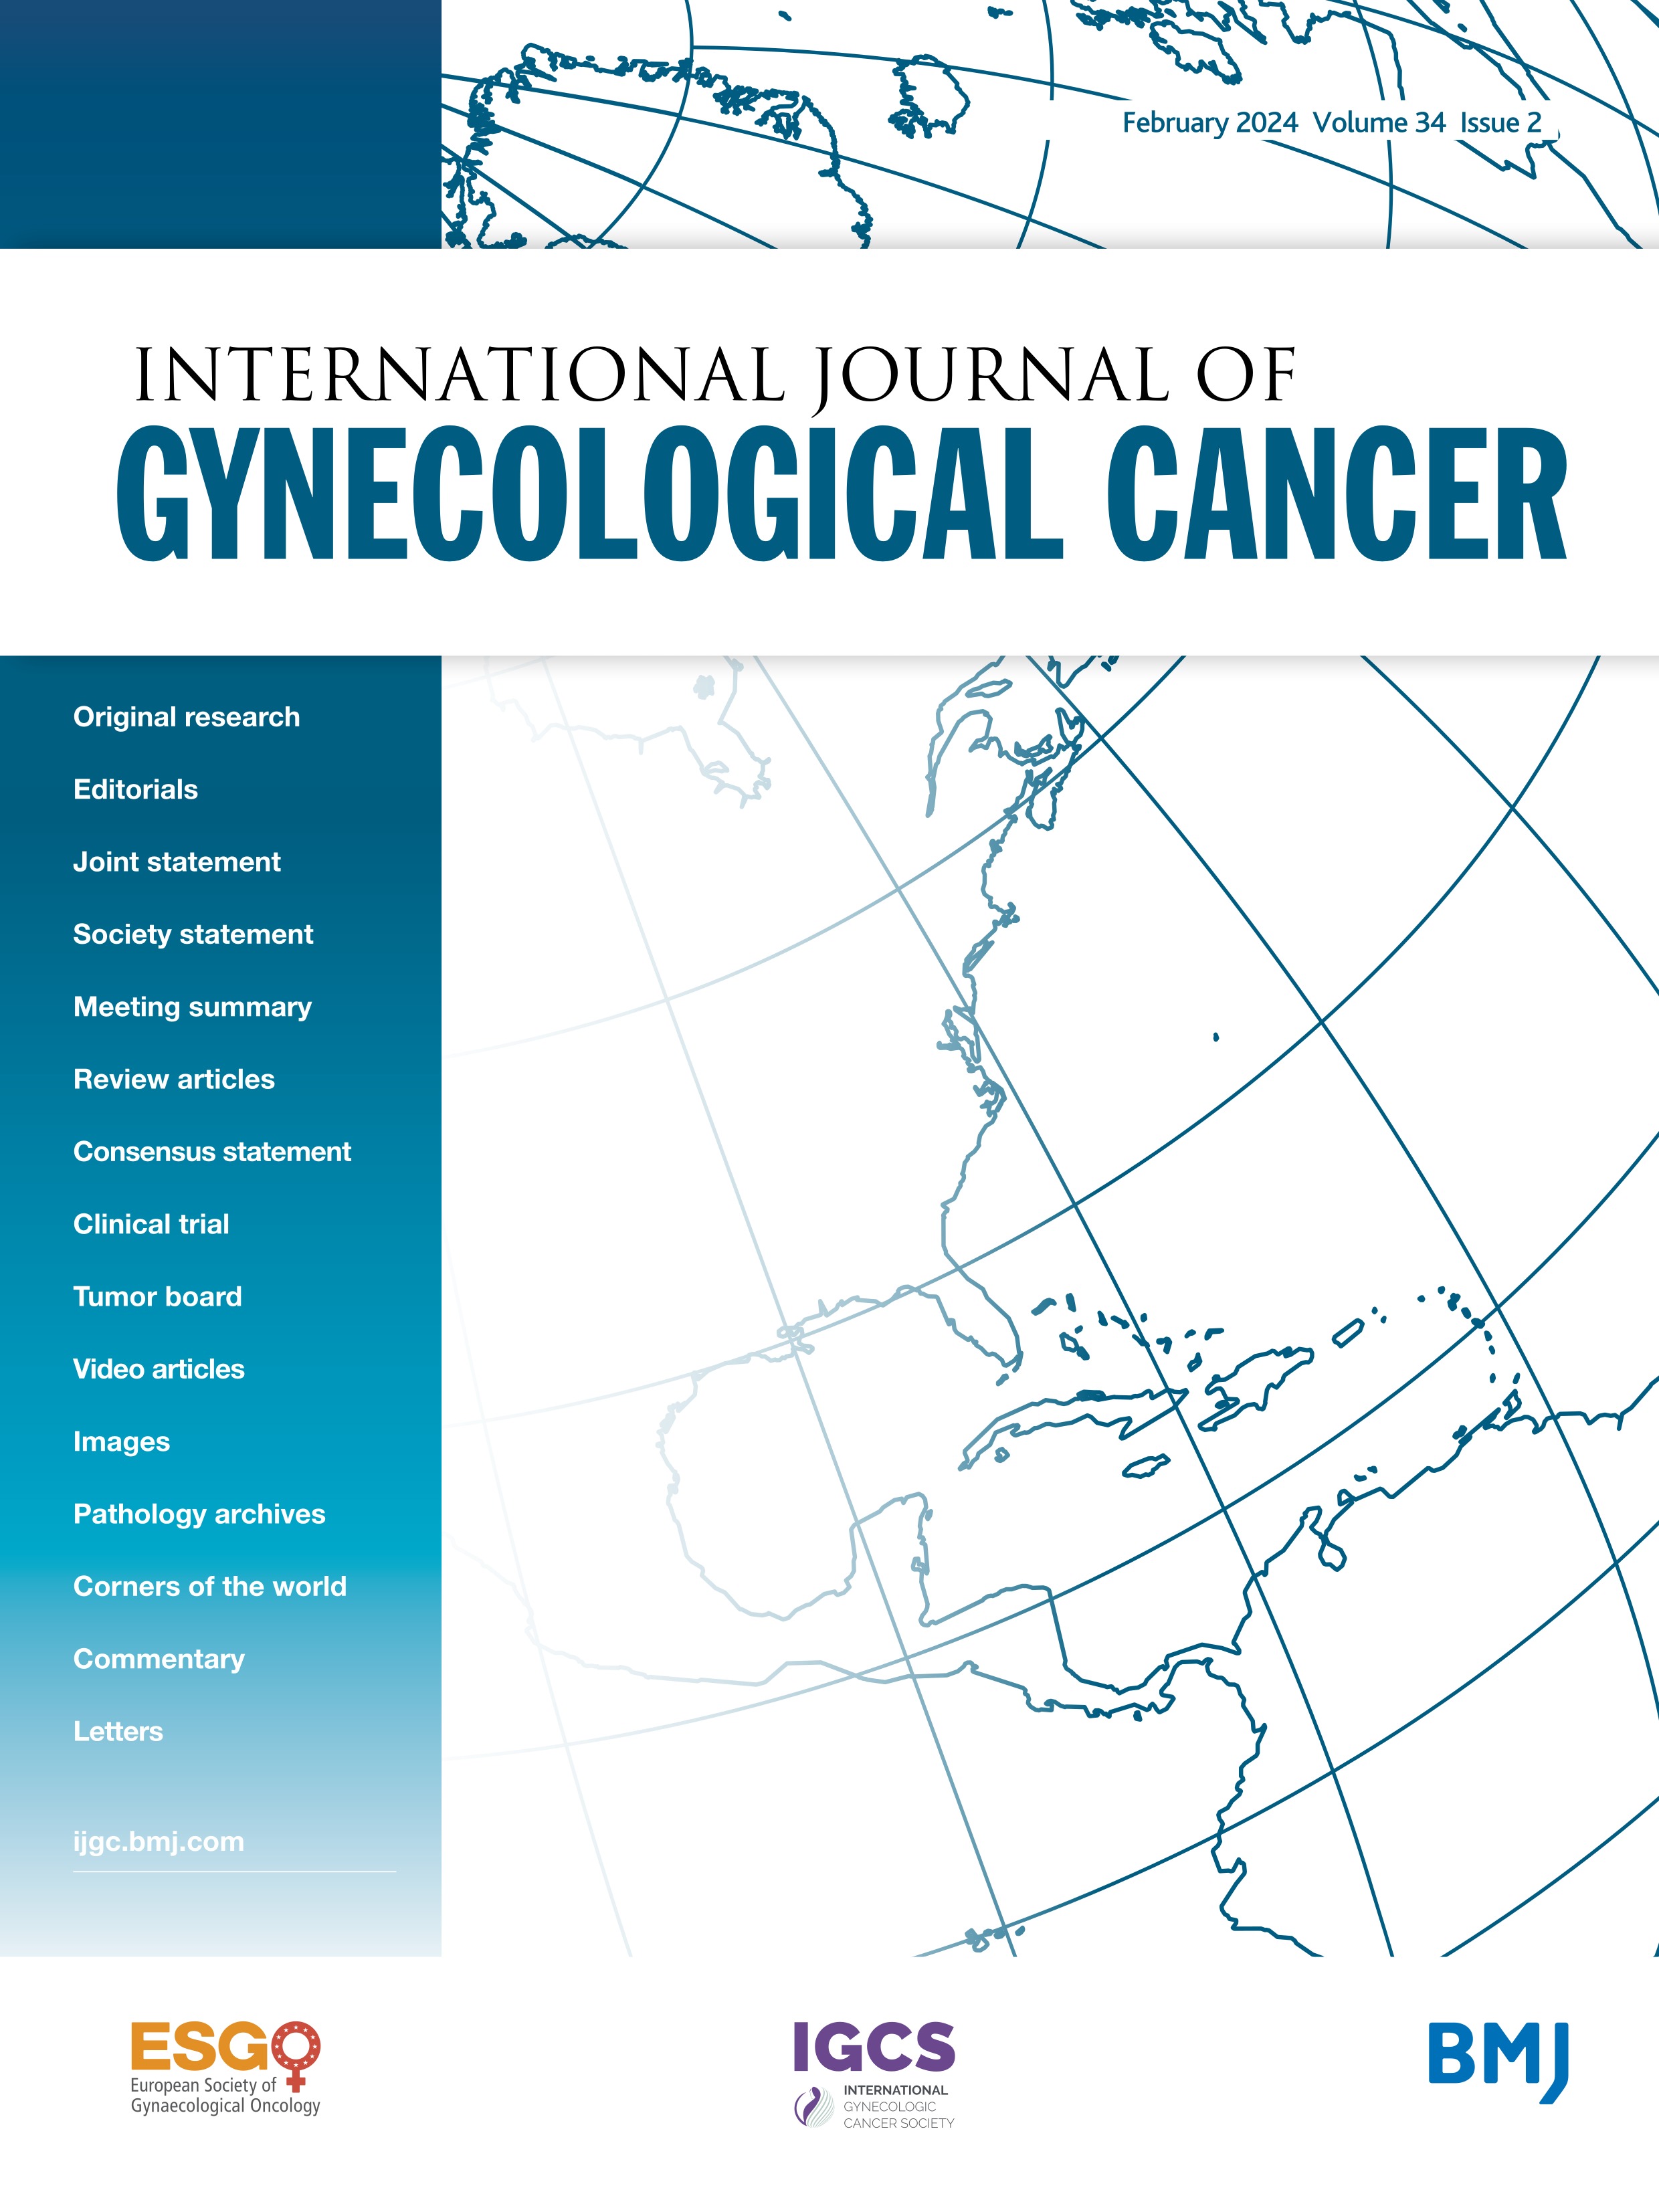 Prognostic factors in young women with epithelial ovarian cancer: the Young Ovarian Cancer-Care (YOC-Care) study